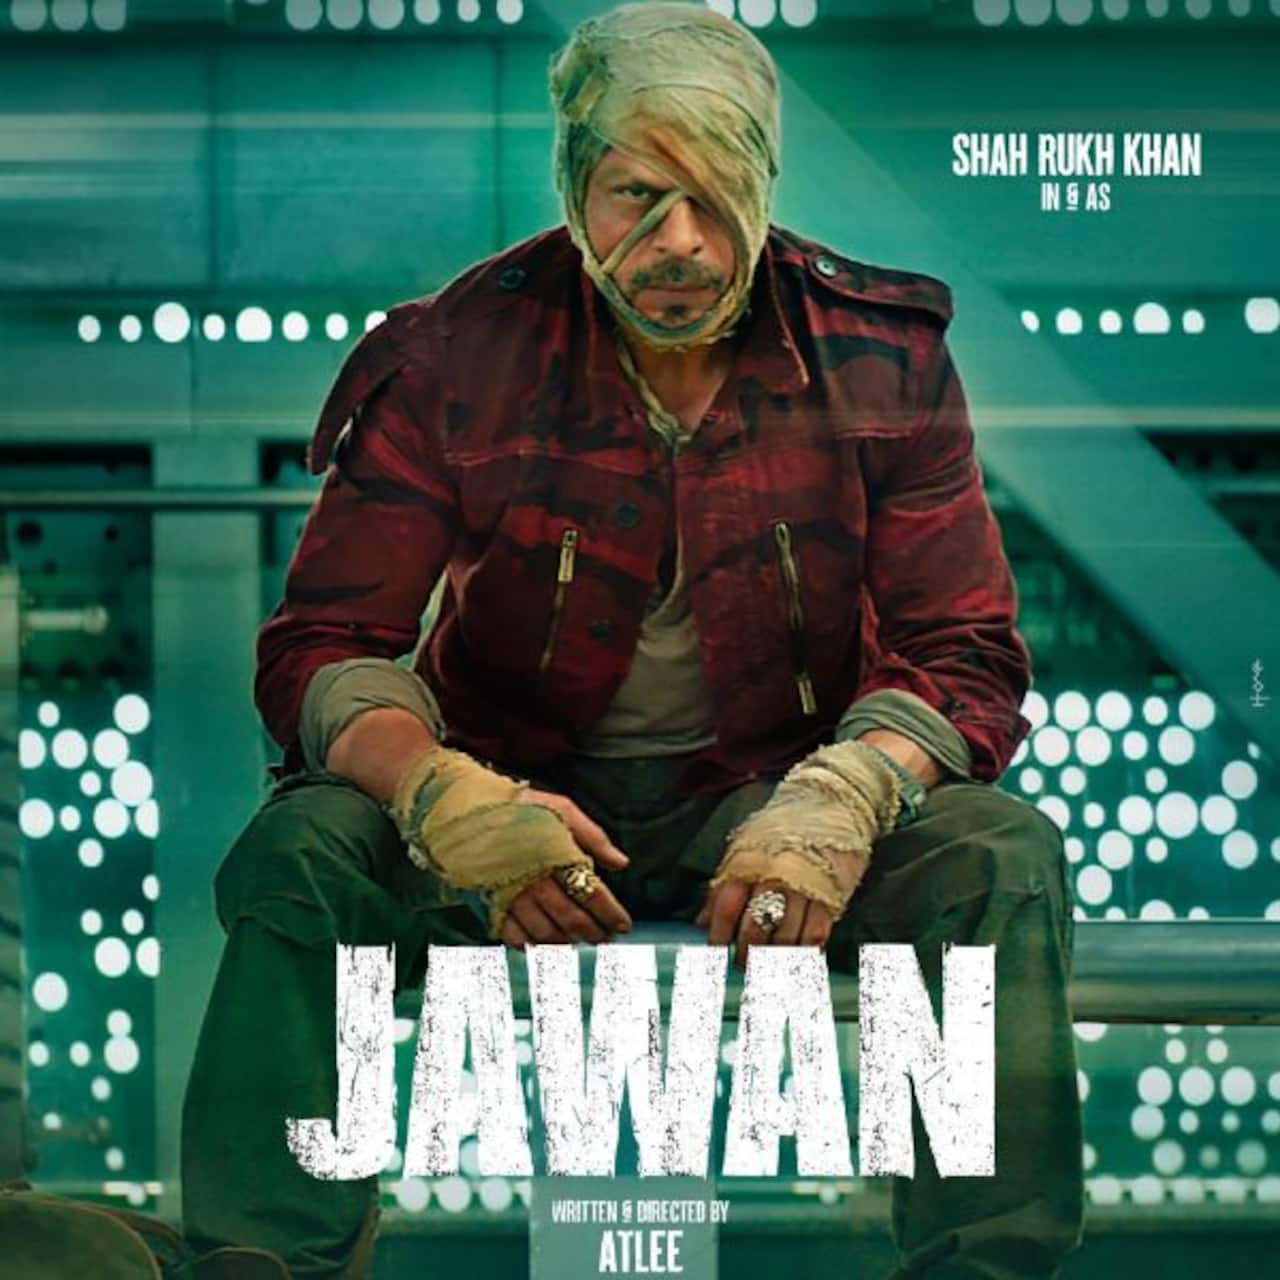 Jawan teaser breaks record for most liked announcement video on YouTube